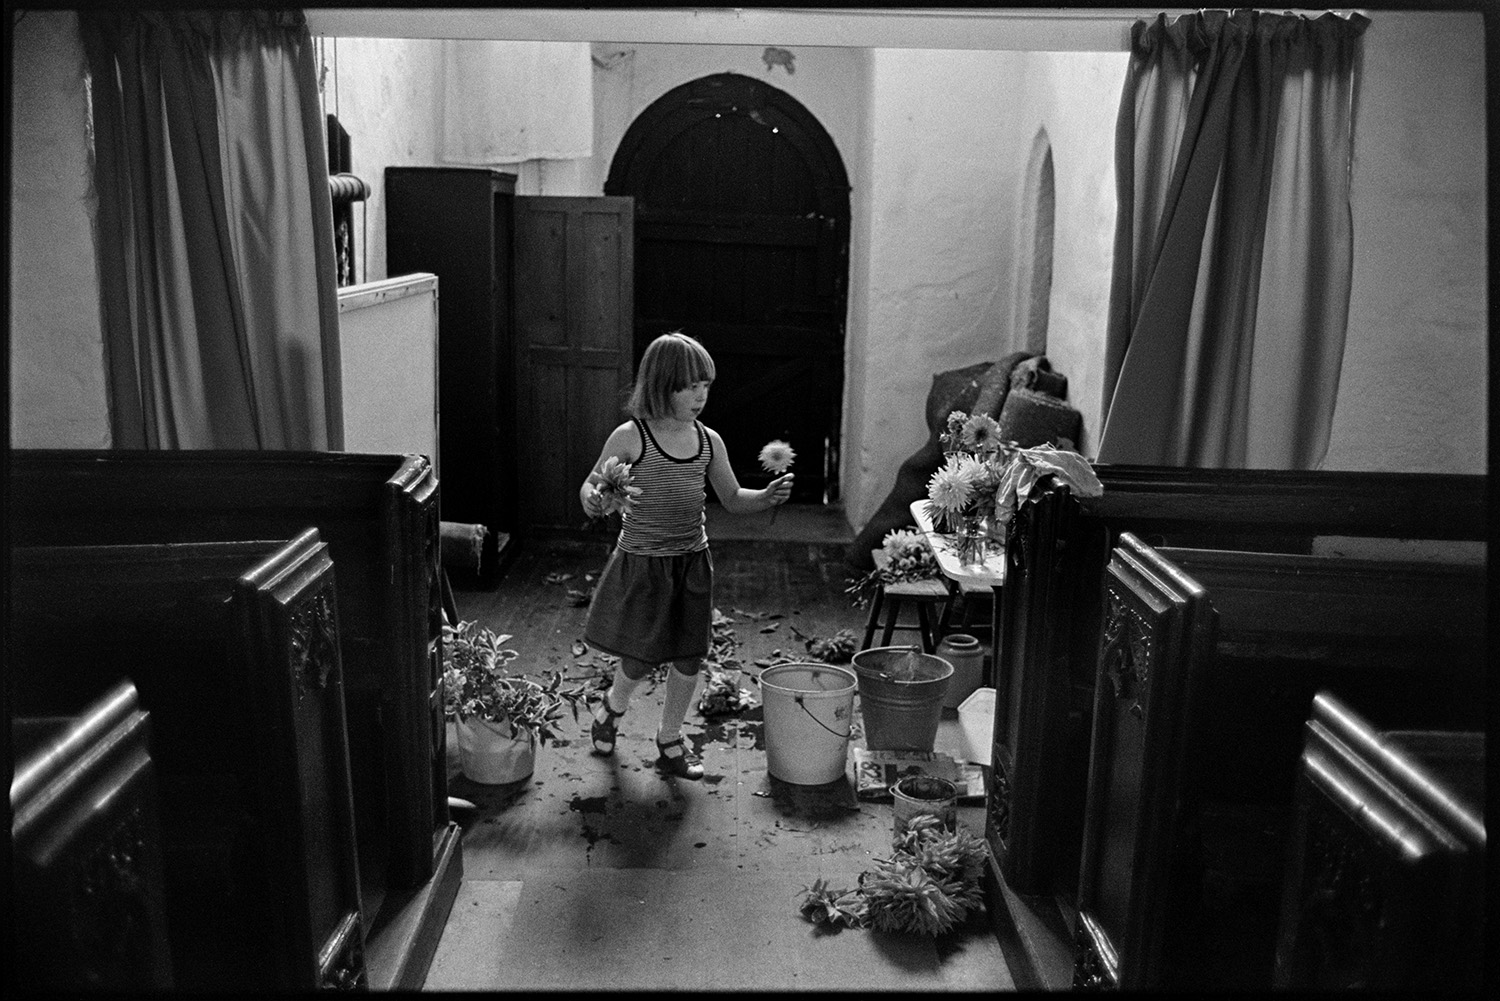 Women decorating church for Harvest Festival. Flowers.
[A girl surrounded by buckets and cut flowers in Dowland Church, arranging flowers in a jar for the Harvest Festival. Wooden pews can be seen in the foreground.]